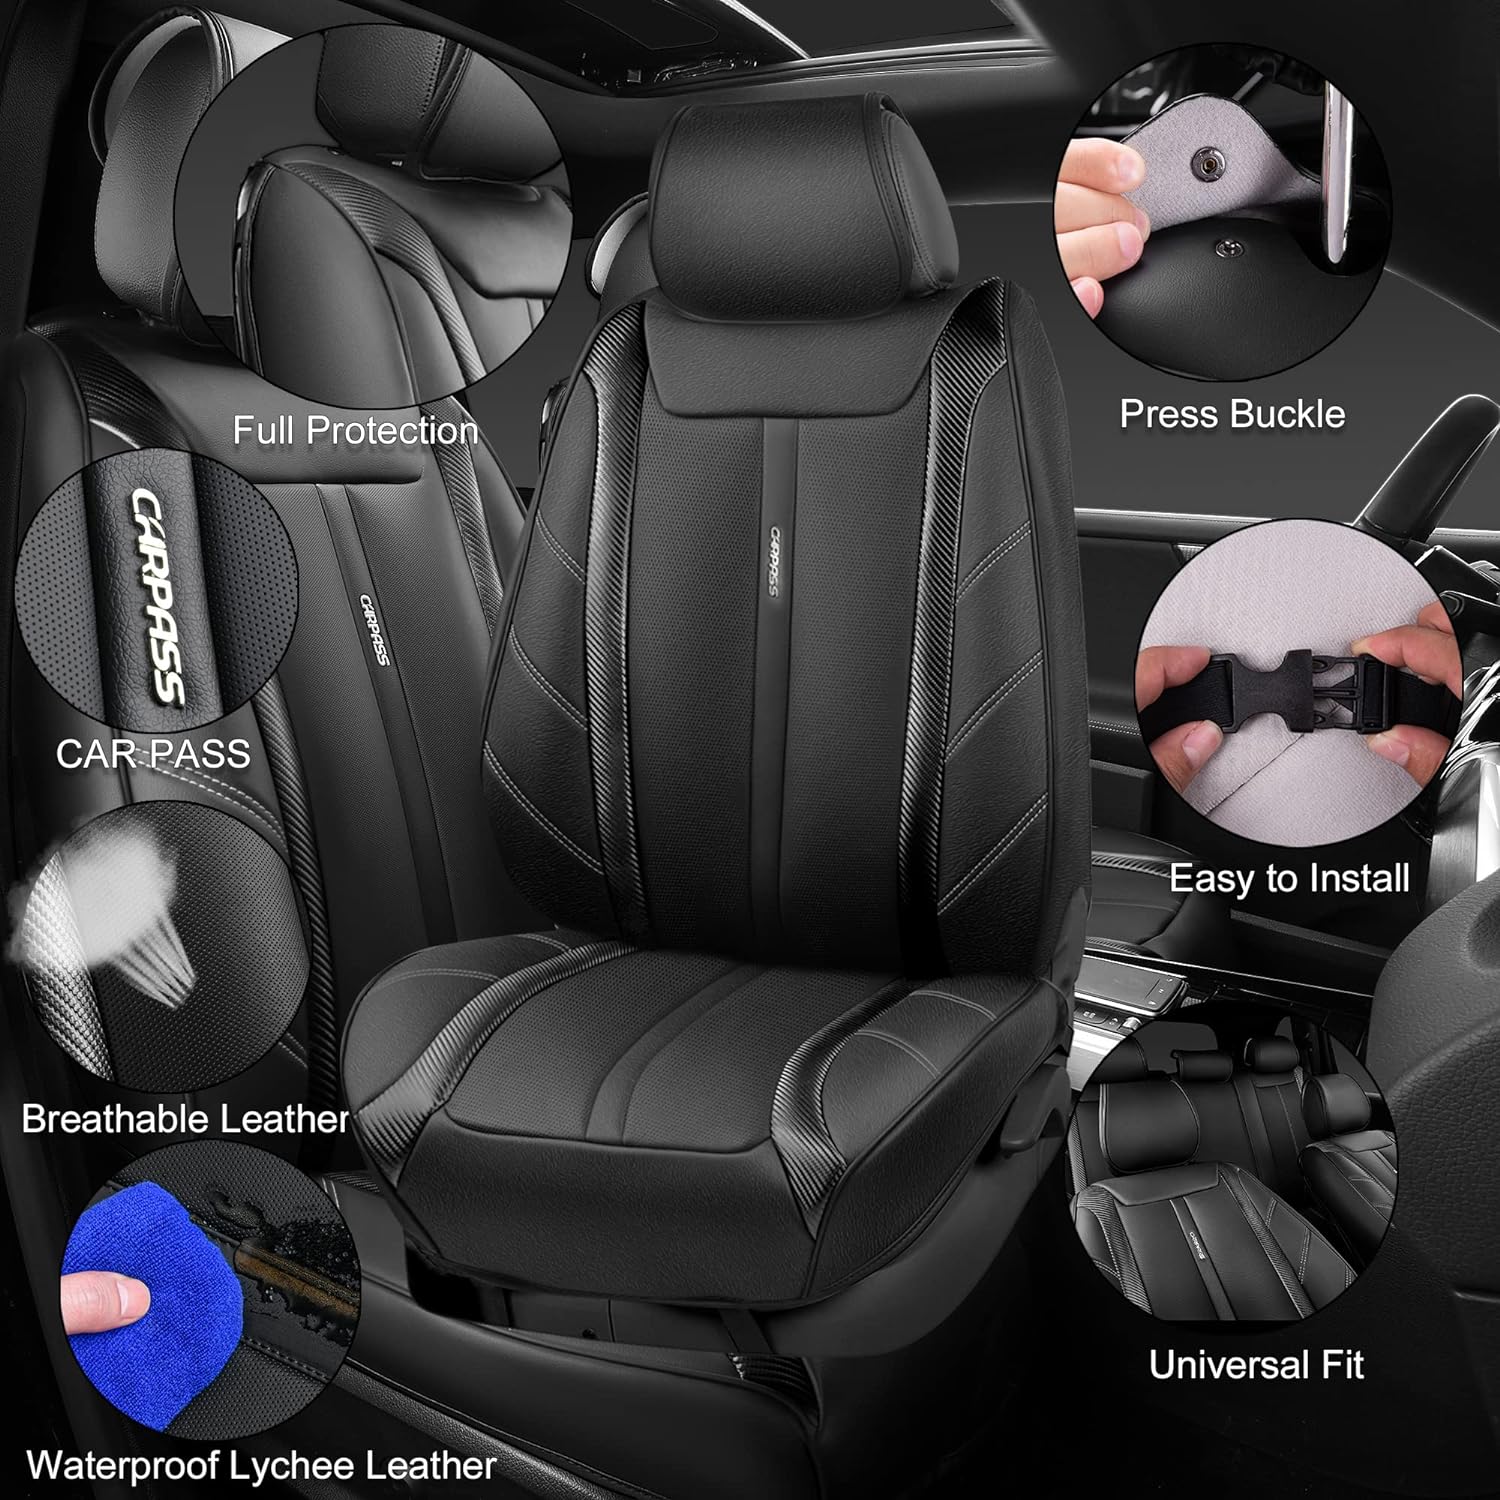 CAR PASS Steering Wheel Cover and Heavy Duty Leather Seat Cover Combo, Waterproof Automotive Seat Cover Fit for Most Sedans, SUV, Pick-Up, Truck.Carbon Fiber Black.